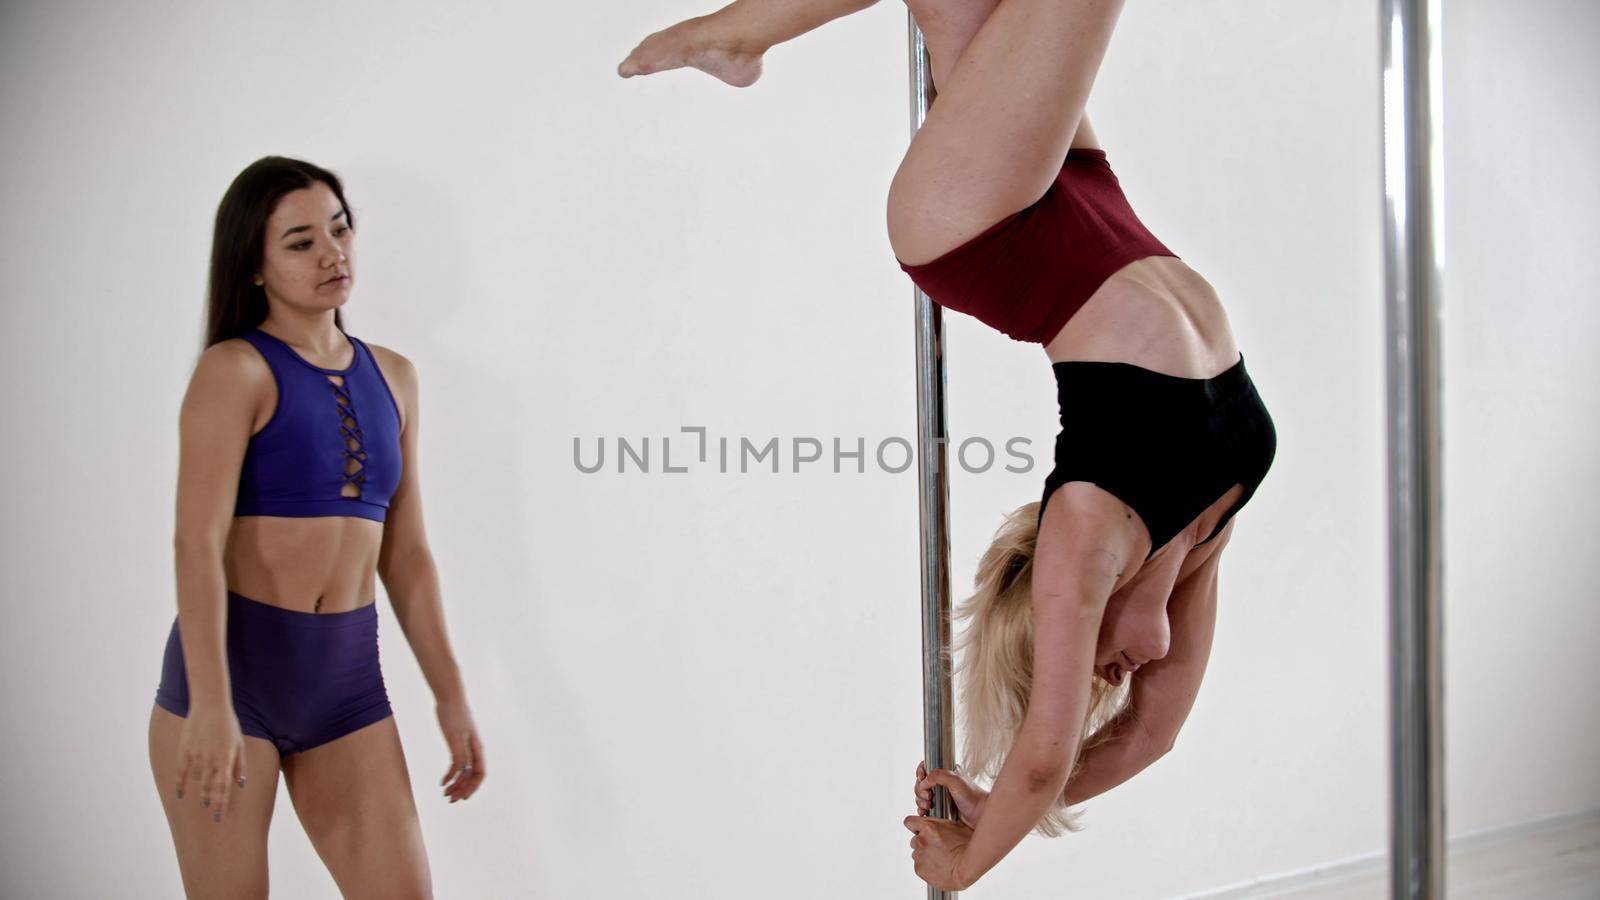 A blonde woman having a pole dancing training in the studio - keeping the balance upside down - her trainer watching her. Mid shot